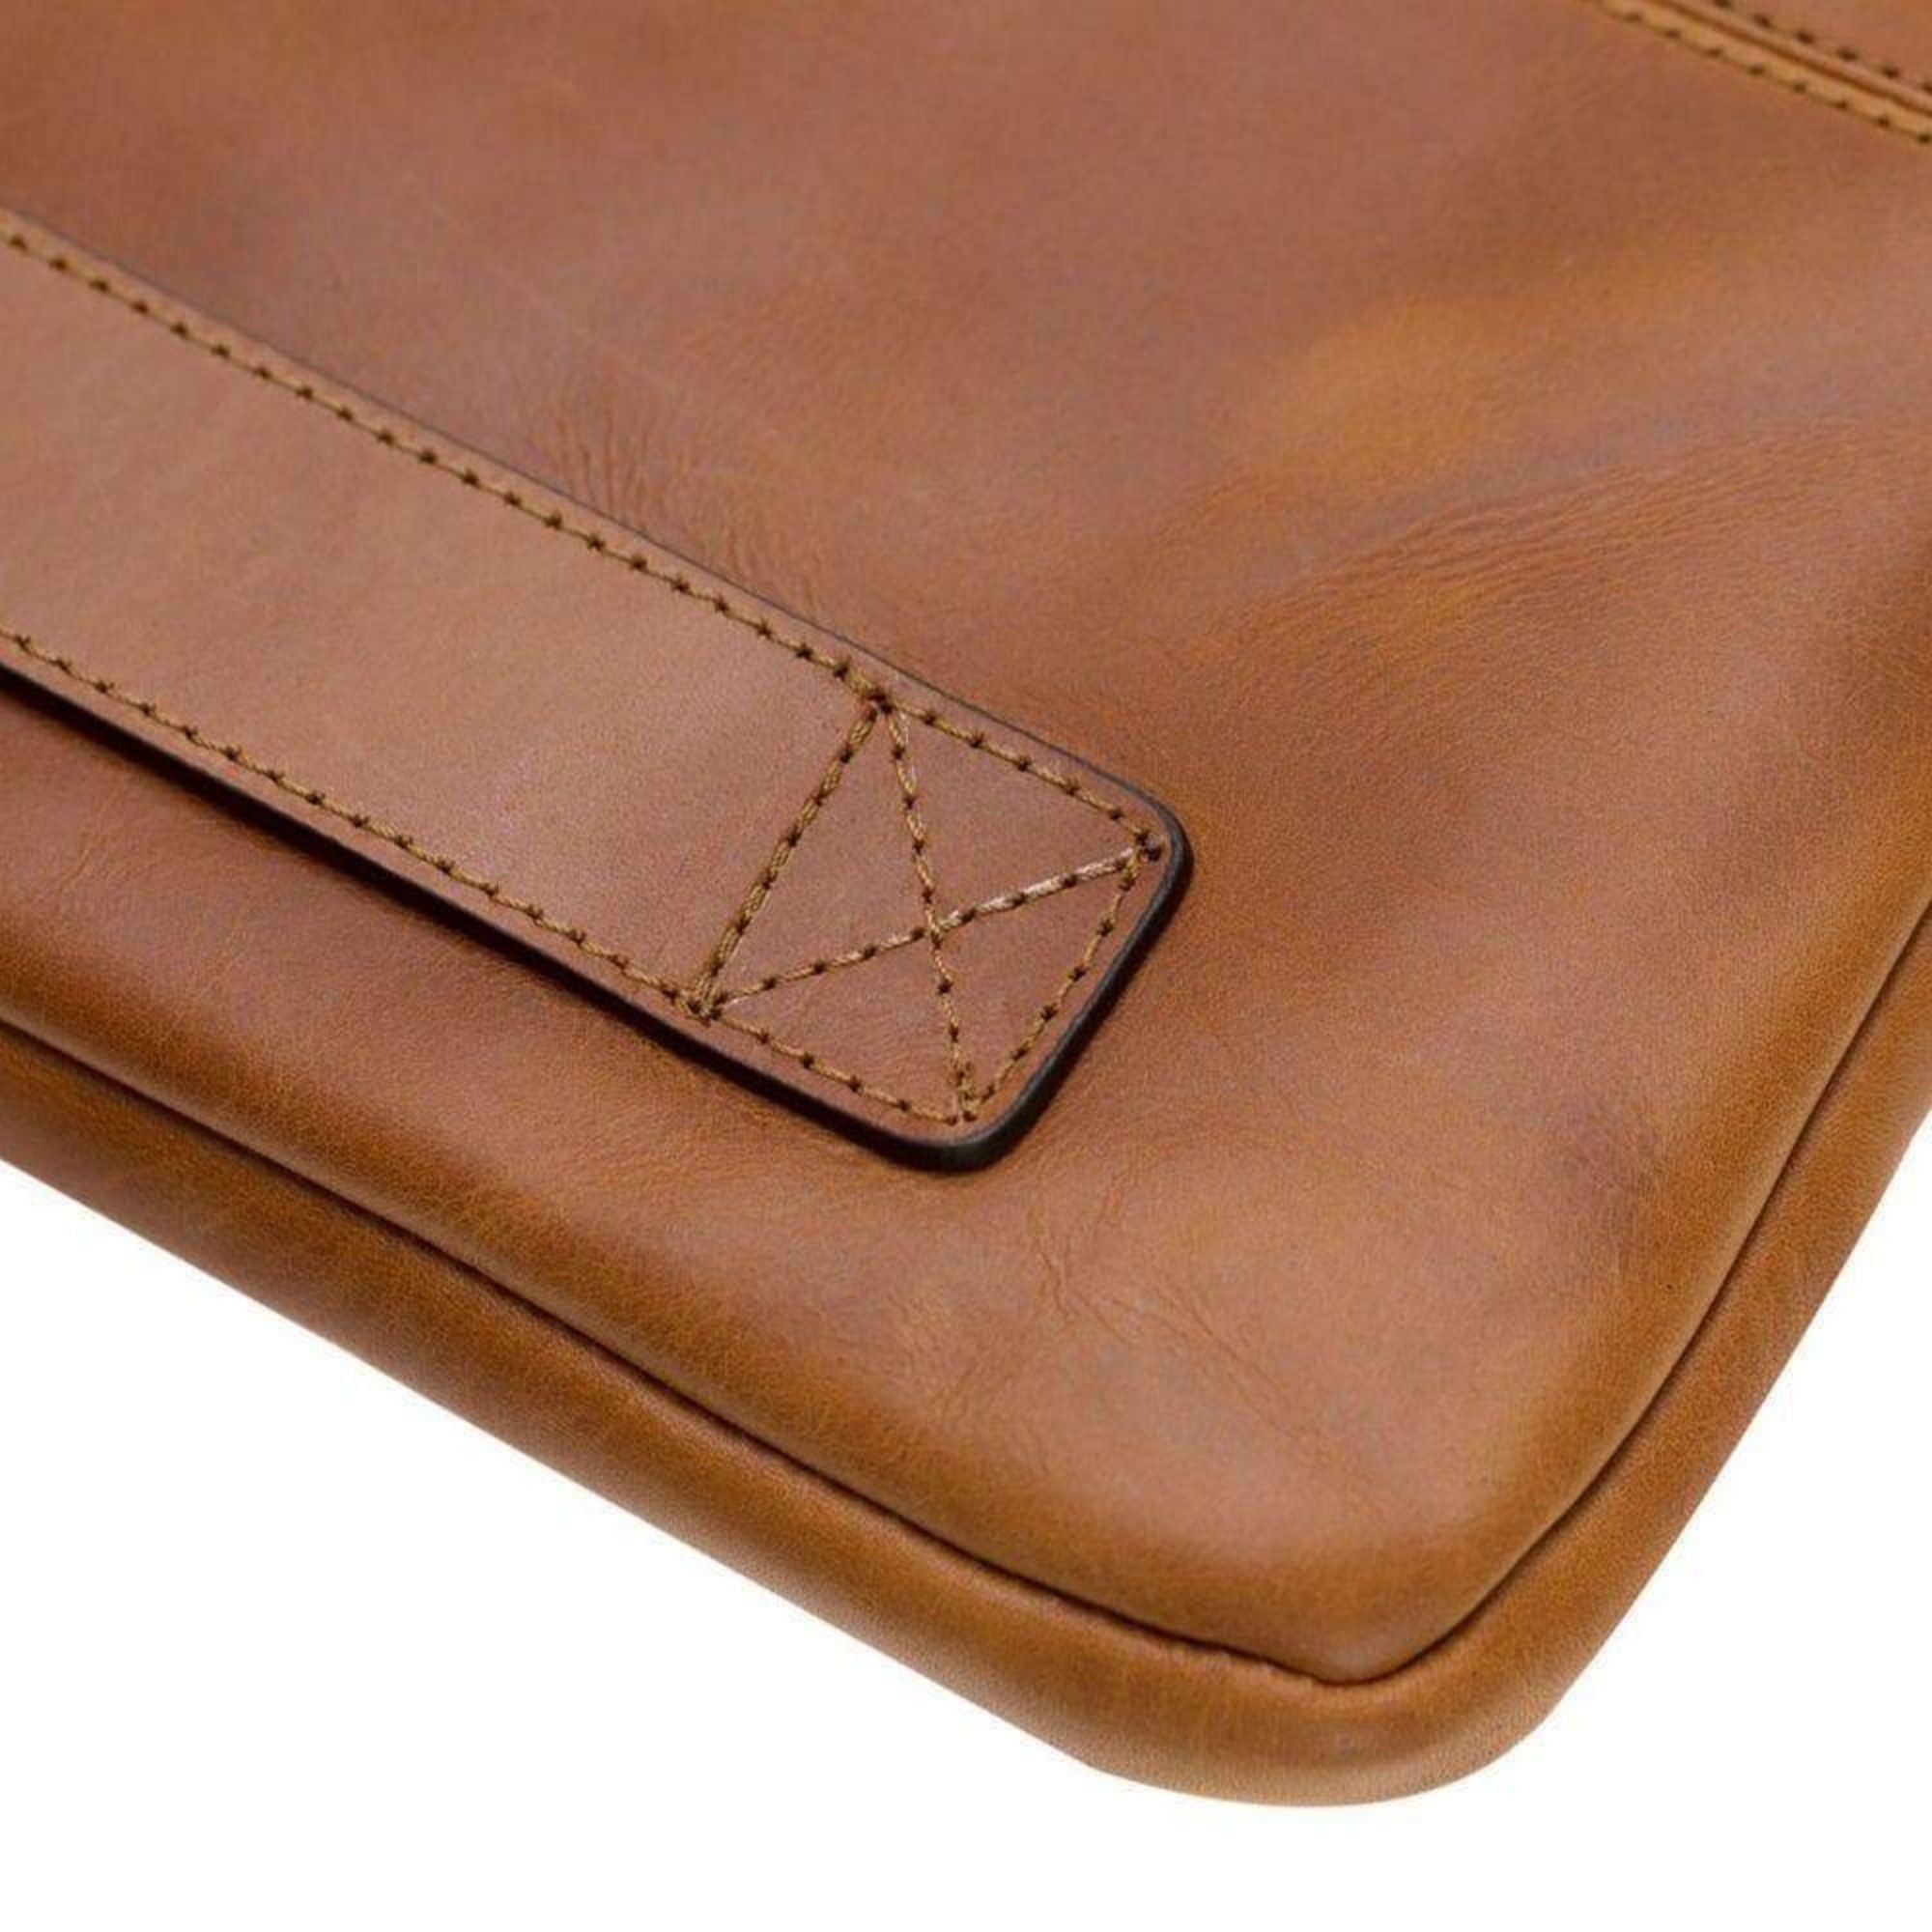 Kemmerer Leather Sleeve for iPad and MacBook - 11 Inches - Tan - TORONATA